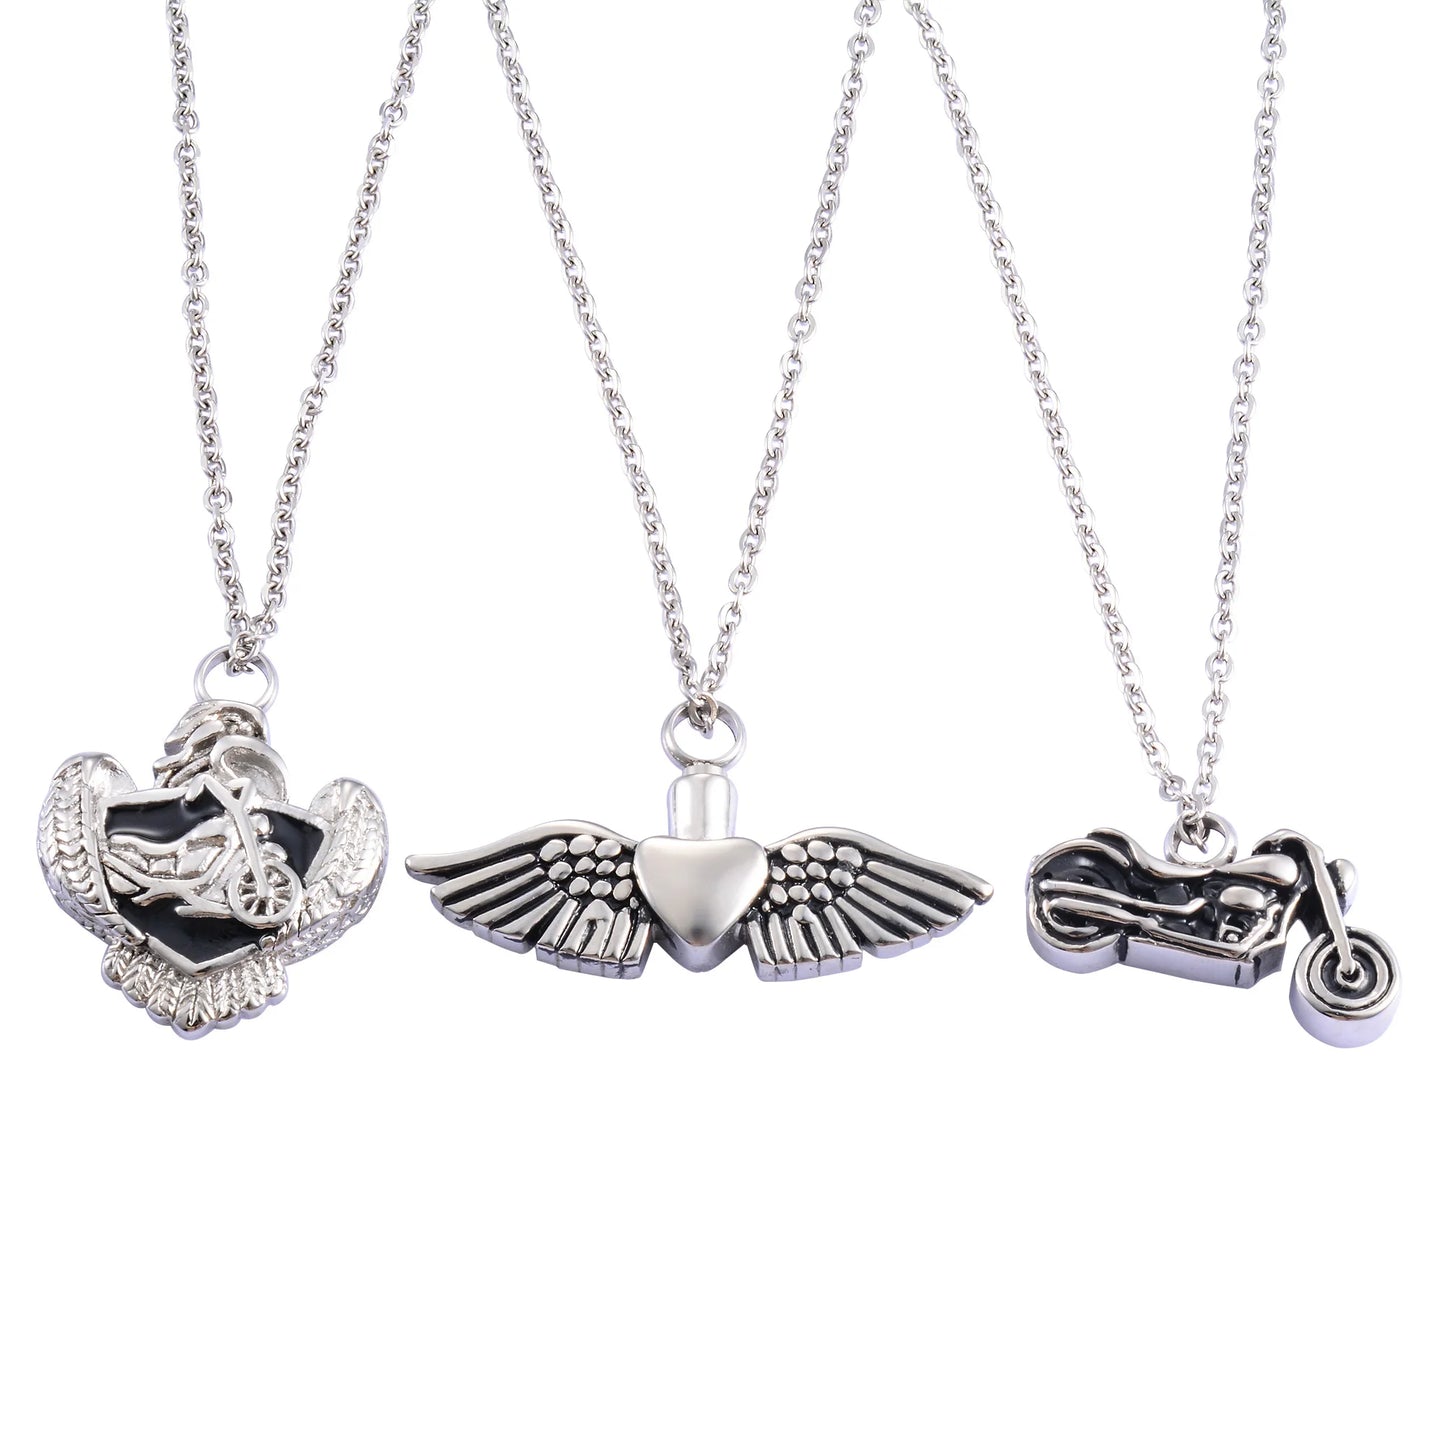 Stainless Steel Cremation Jewelry For Ashes - 3 Variants Motorcycle Style